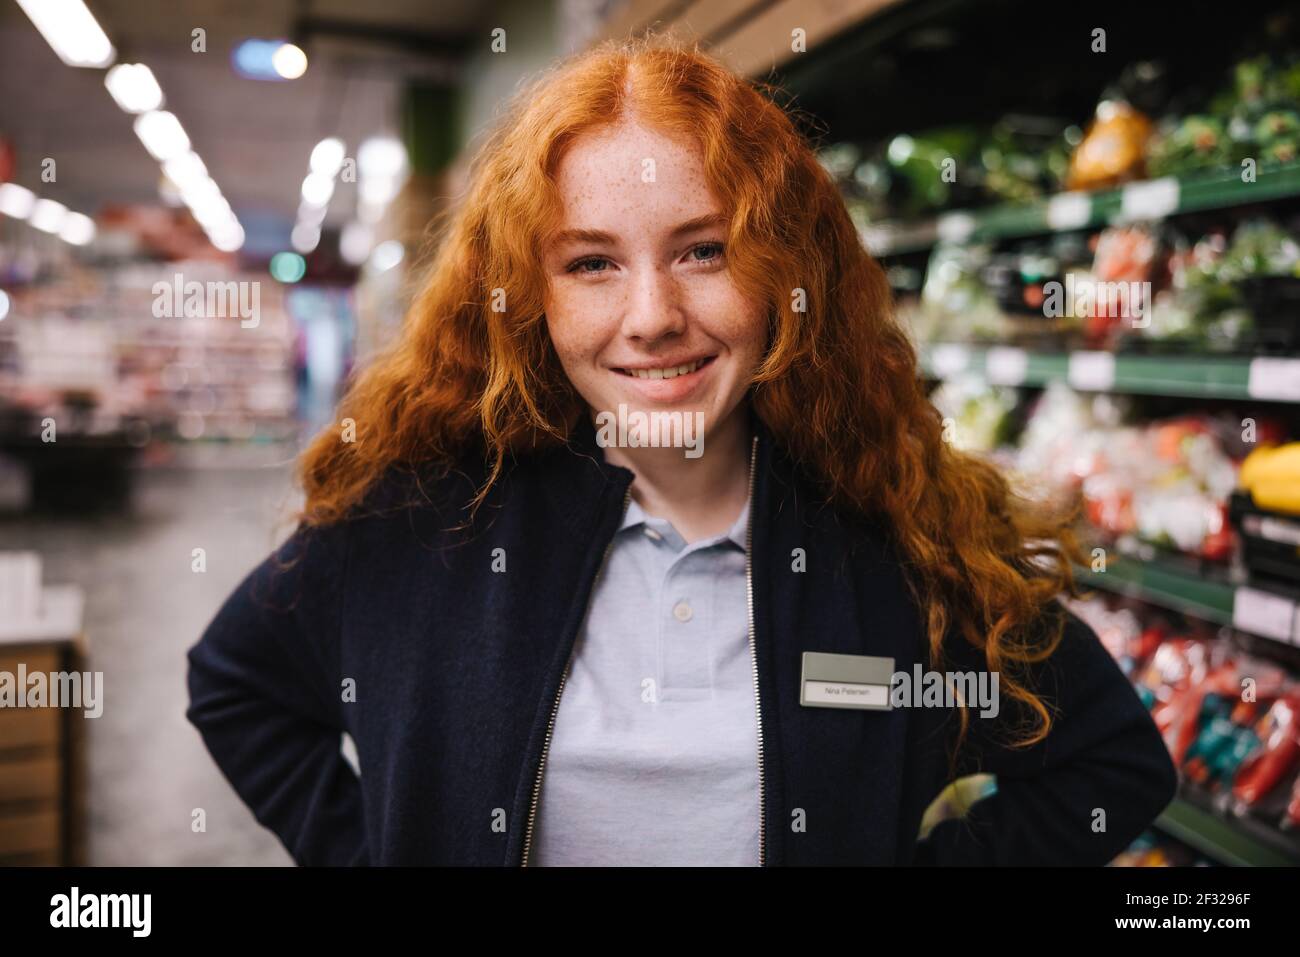 Portrait of young supermarket employee. Woman on a holiday job in a grocery store. Stock Photo